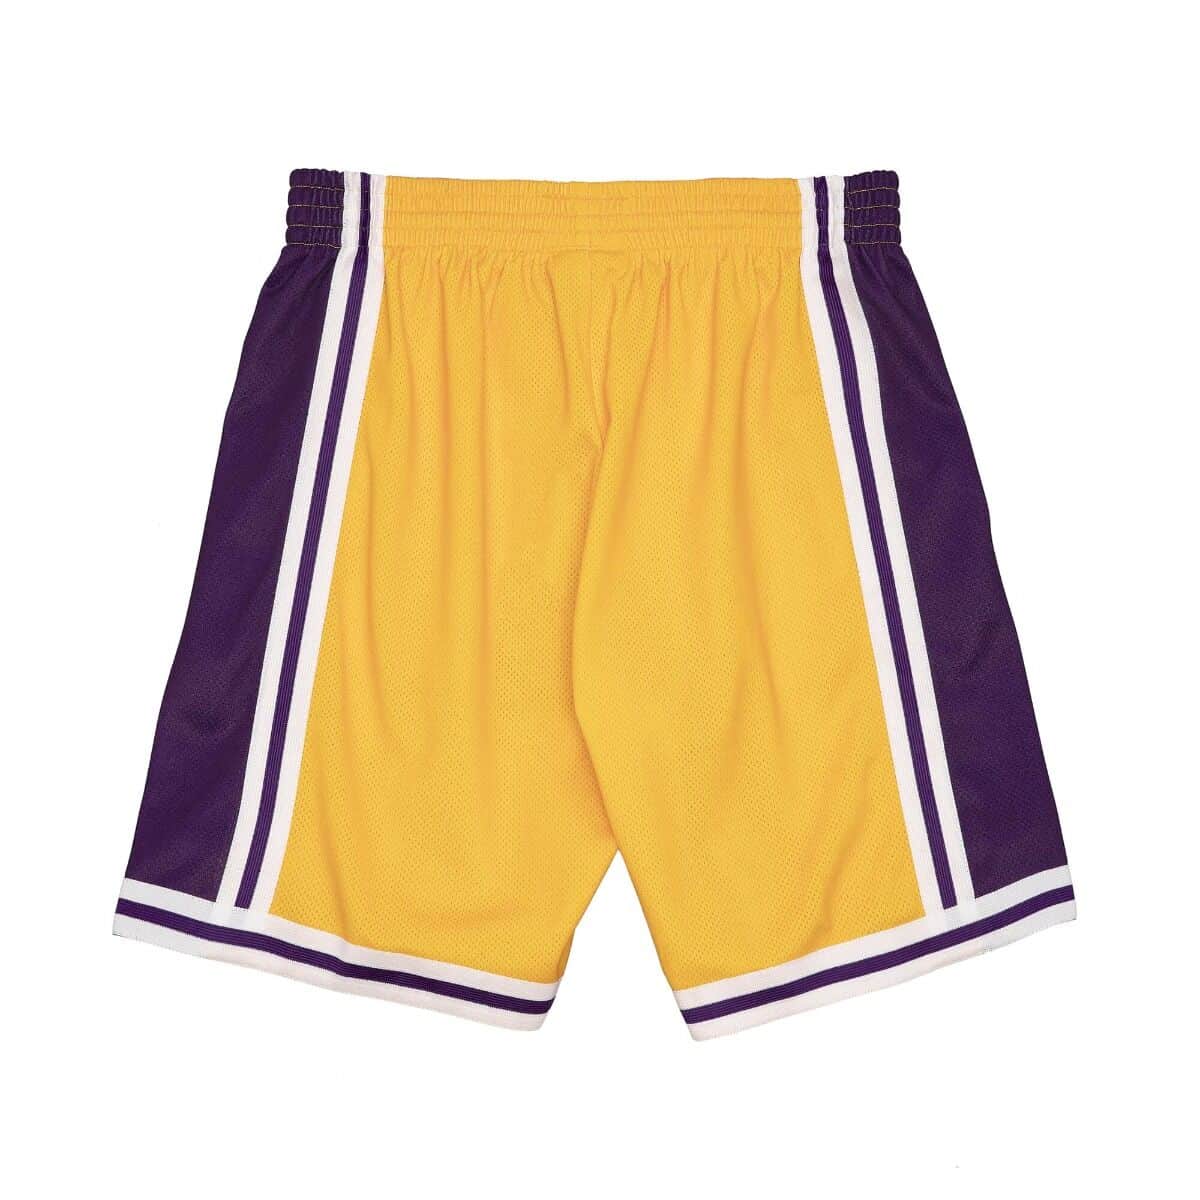 LOS ANGELES LAKERS BLOWN OUT BIG FACE SHORTS